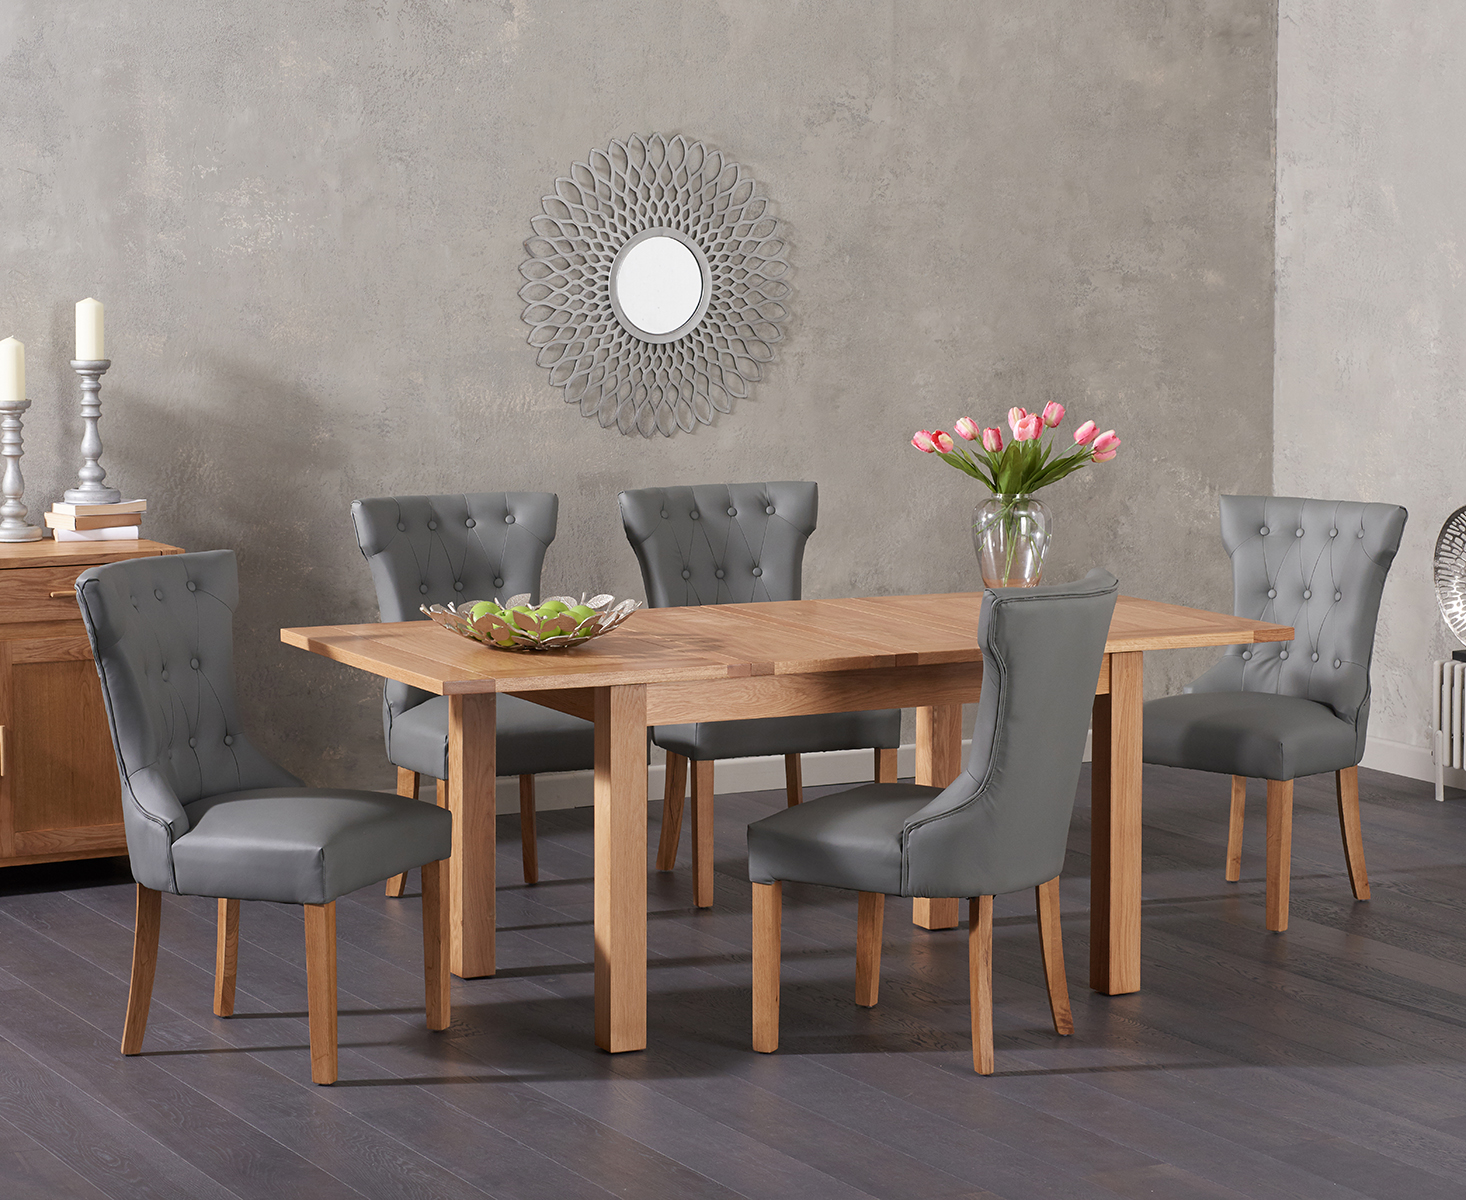 Cheadle 130cm Oak Extending Dining Table With Camille Faux Leather Chairs